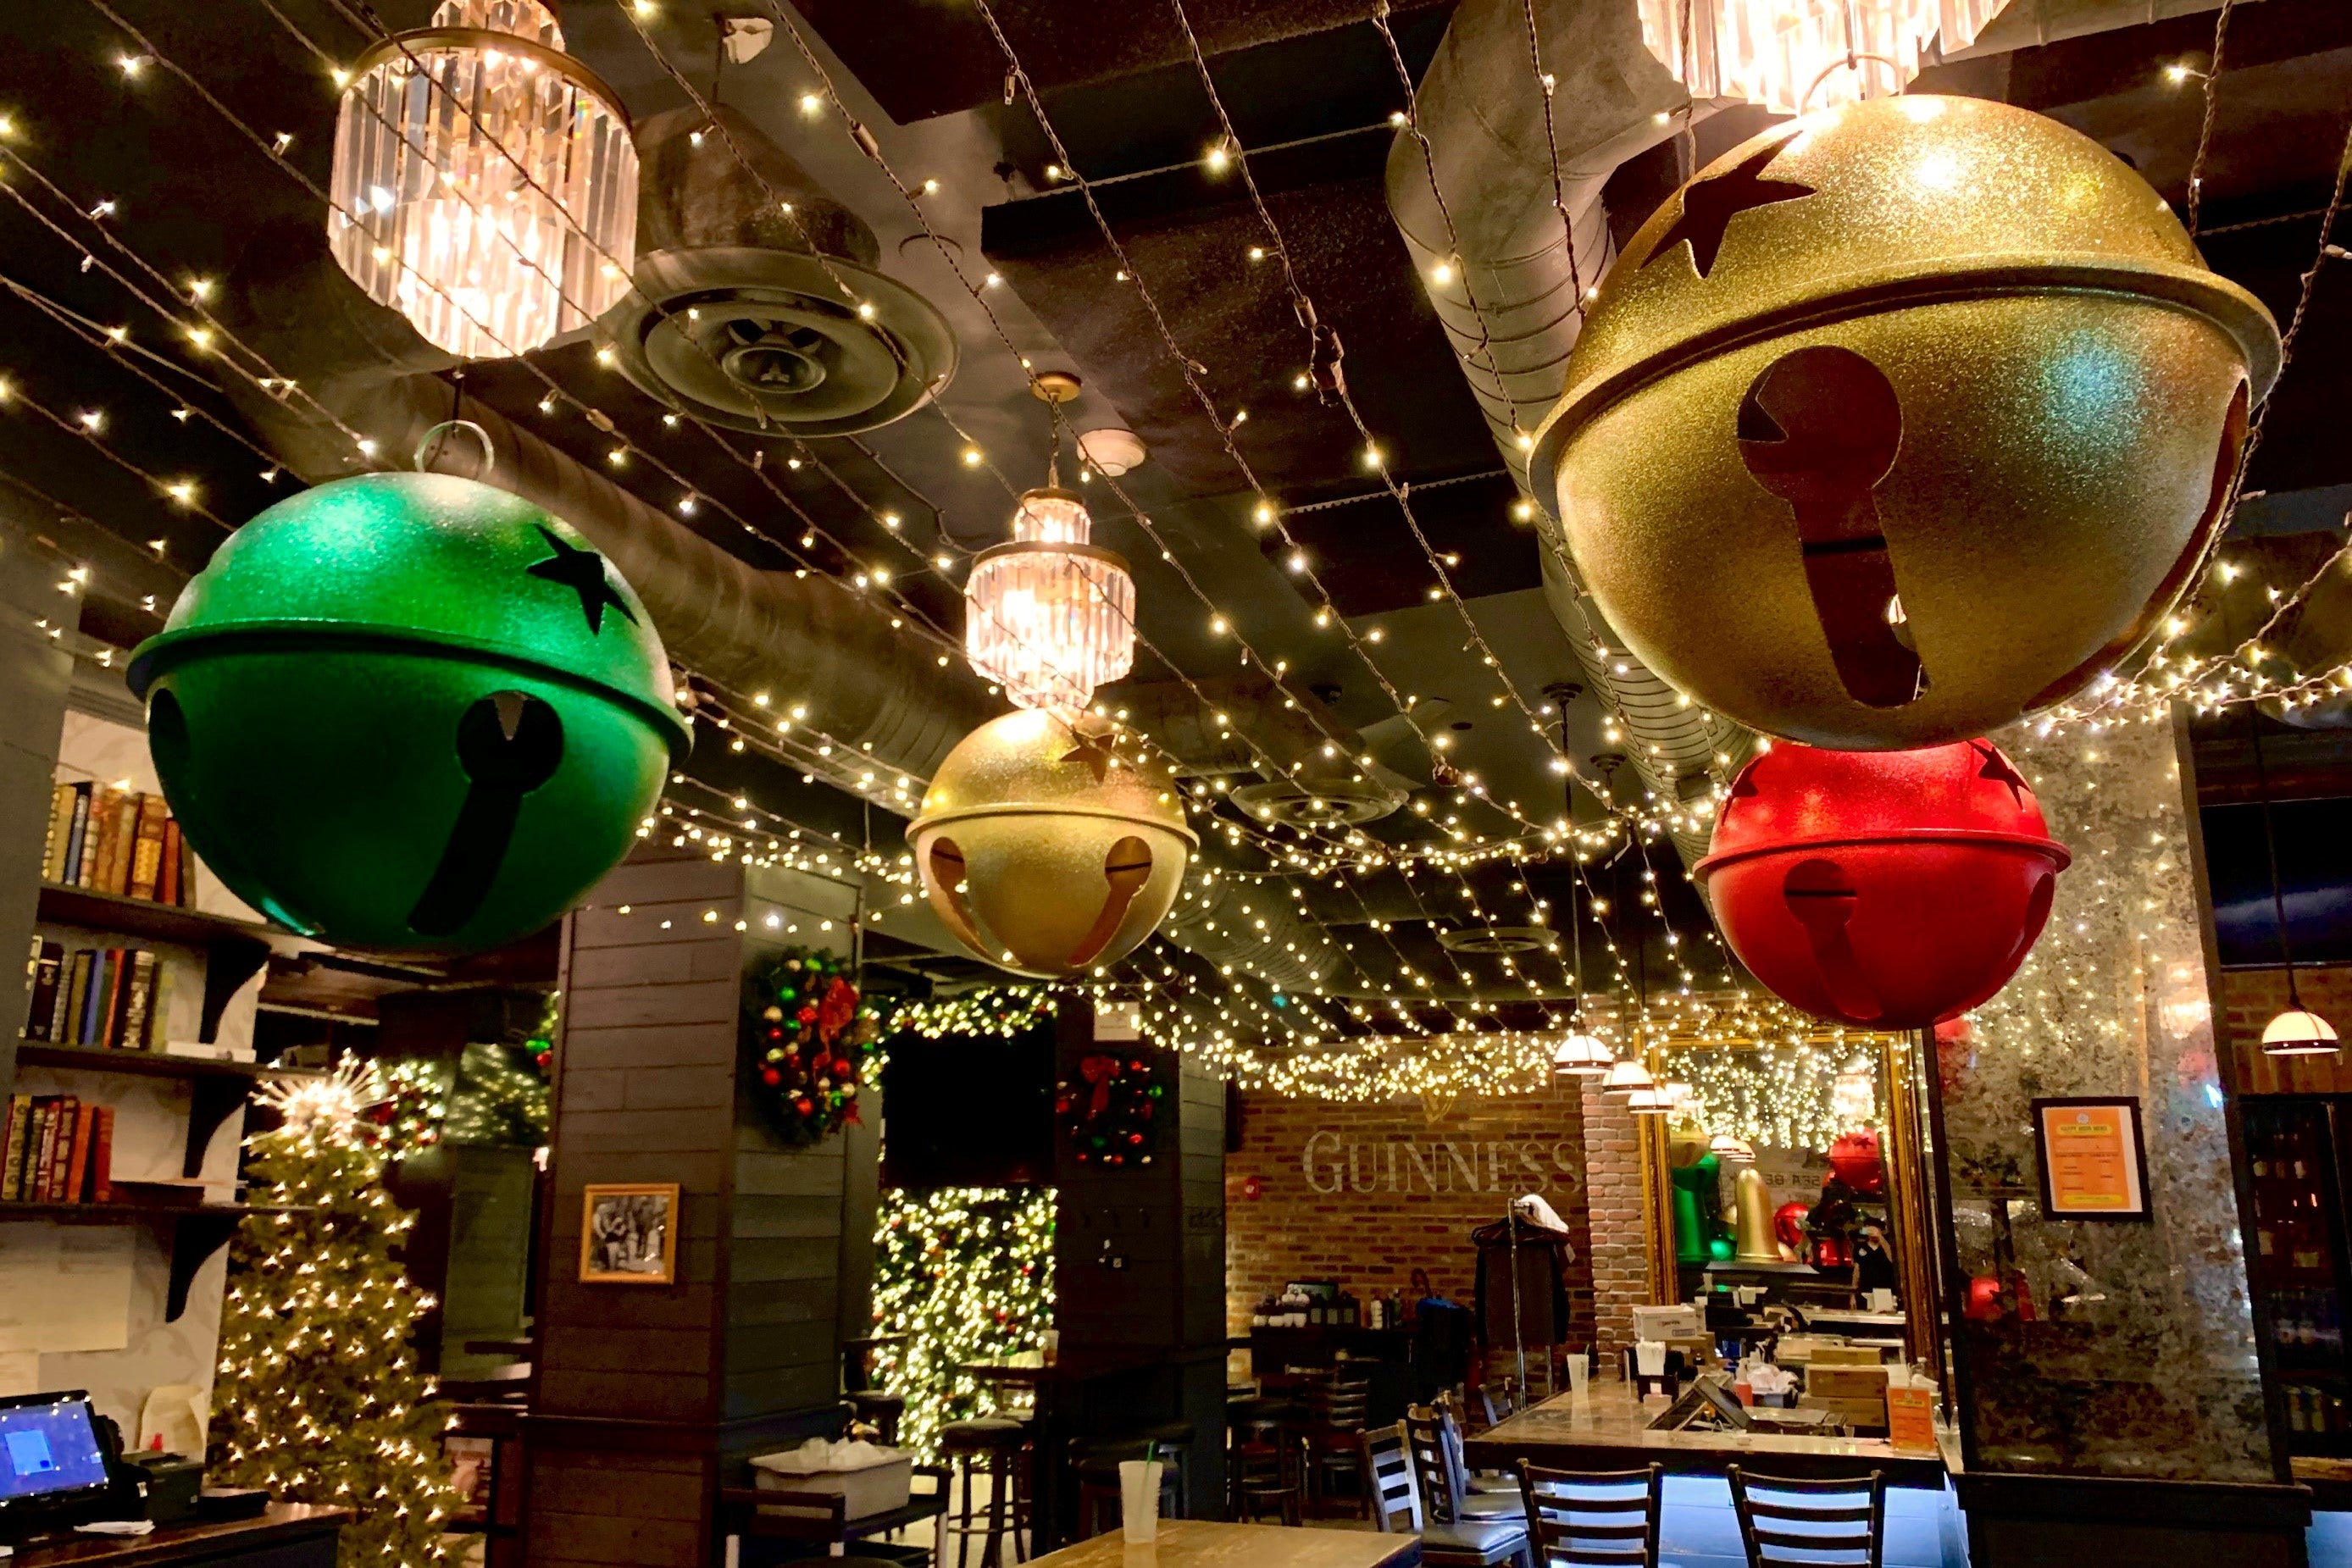 The Chelsea Bell - NYC Top Holiday Restuarant - Christmas Decorations - Bells and holiday lights Hanging above tables